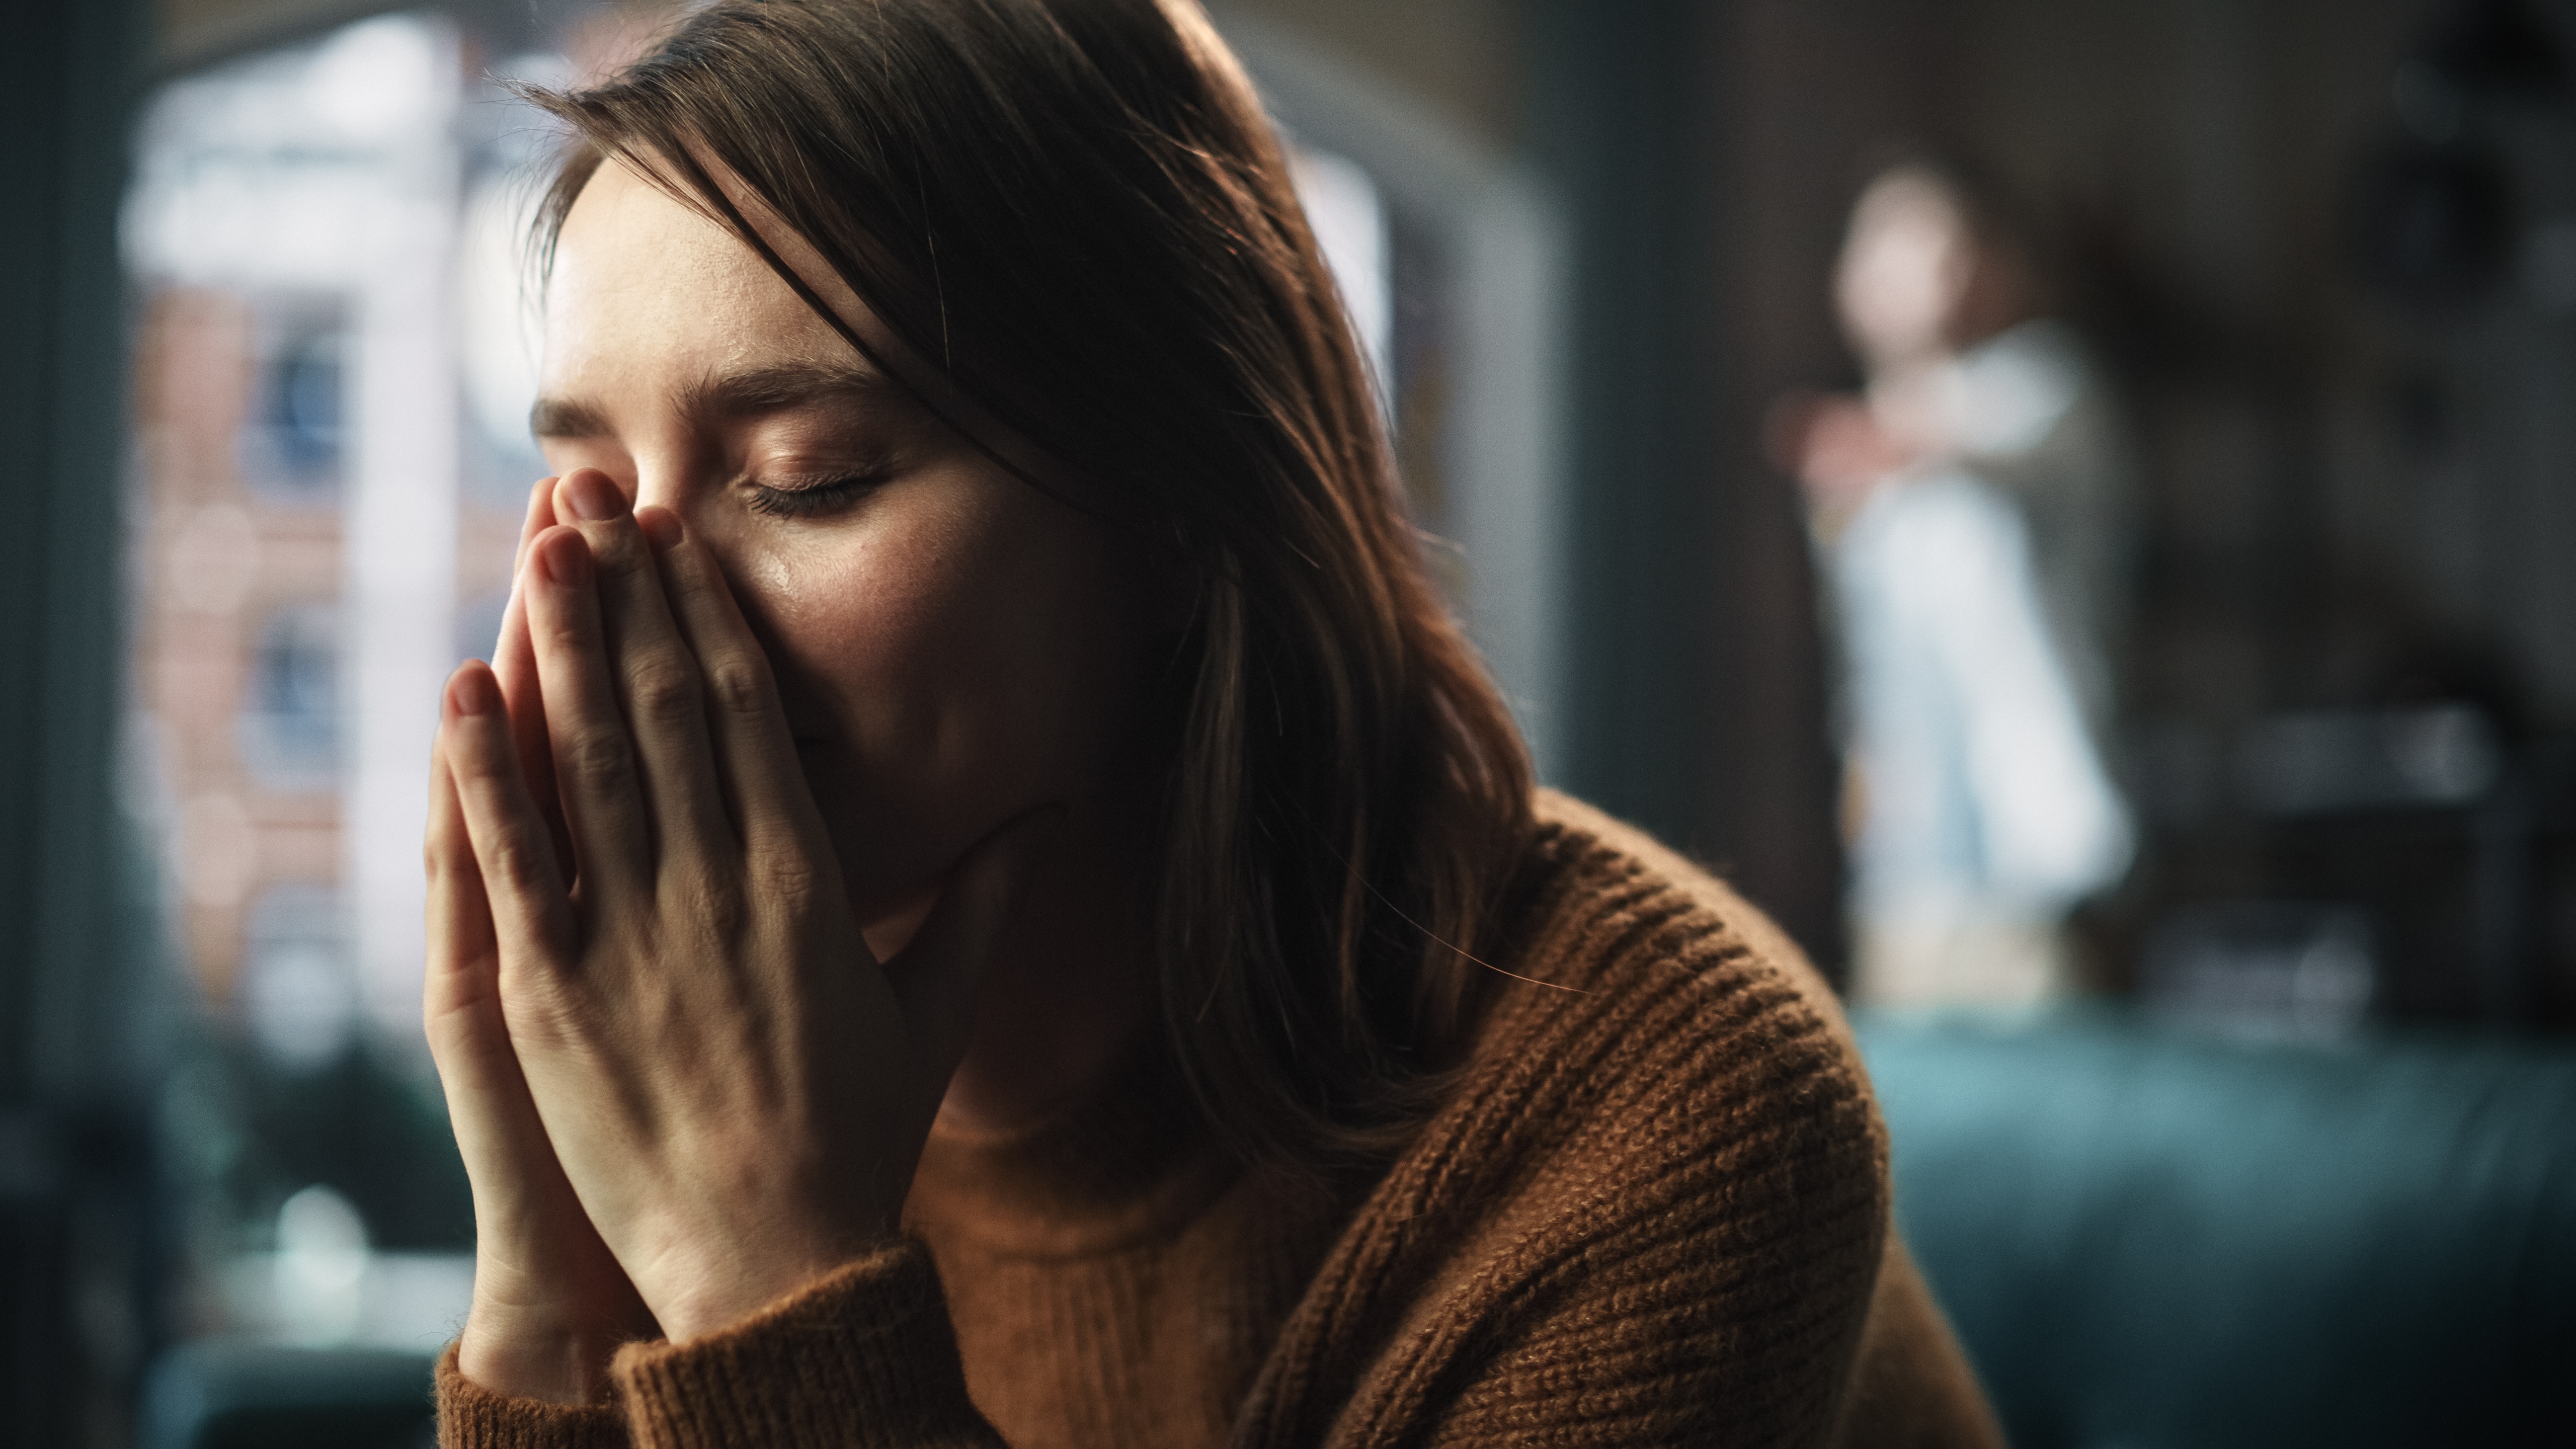 An upset woman covering her face while sitting on a couch with someone standing in the background | Source: Shutterstock